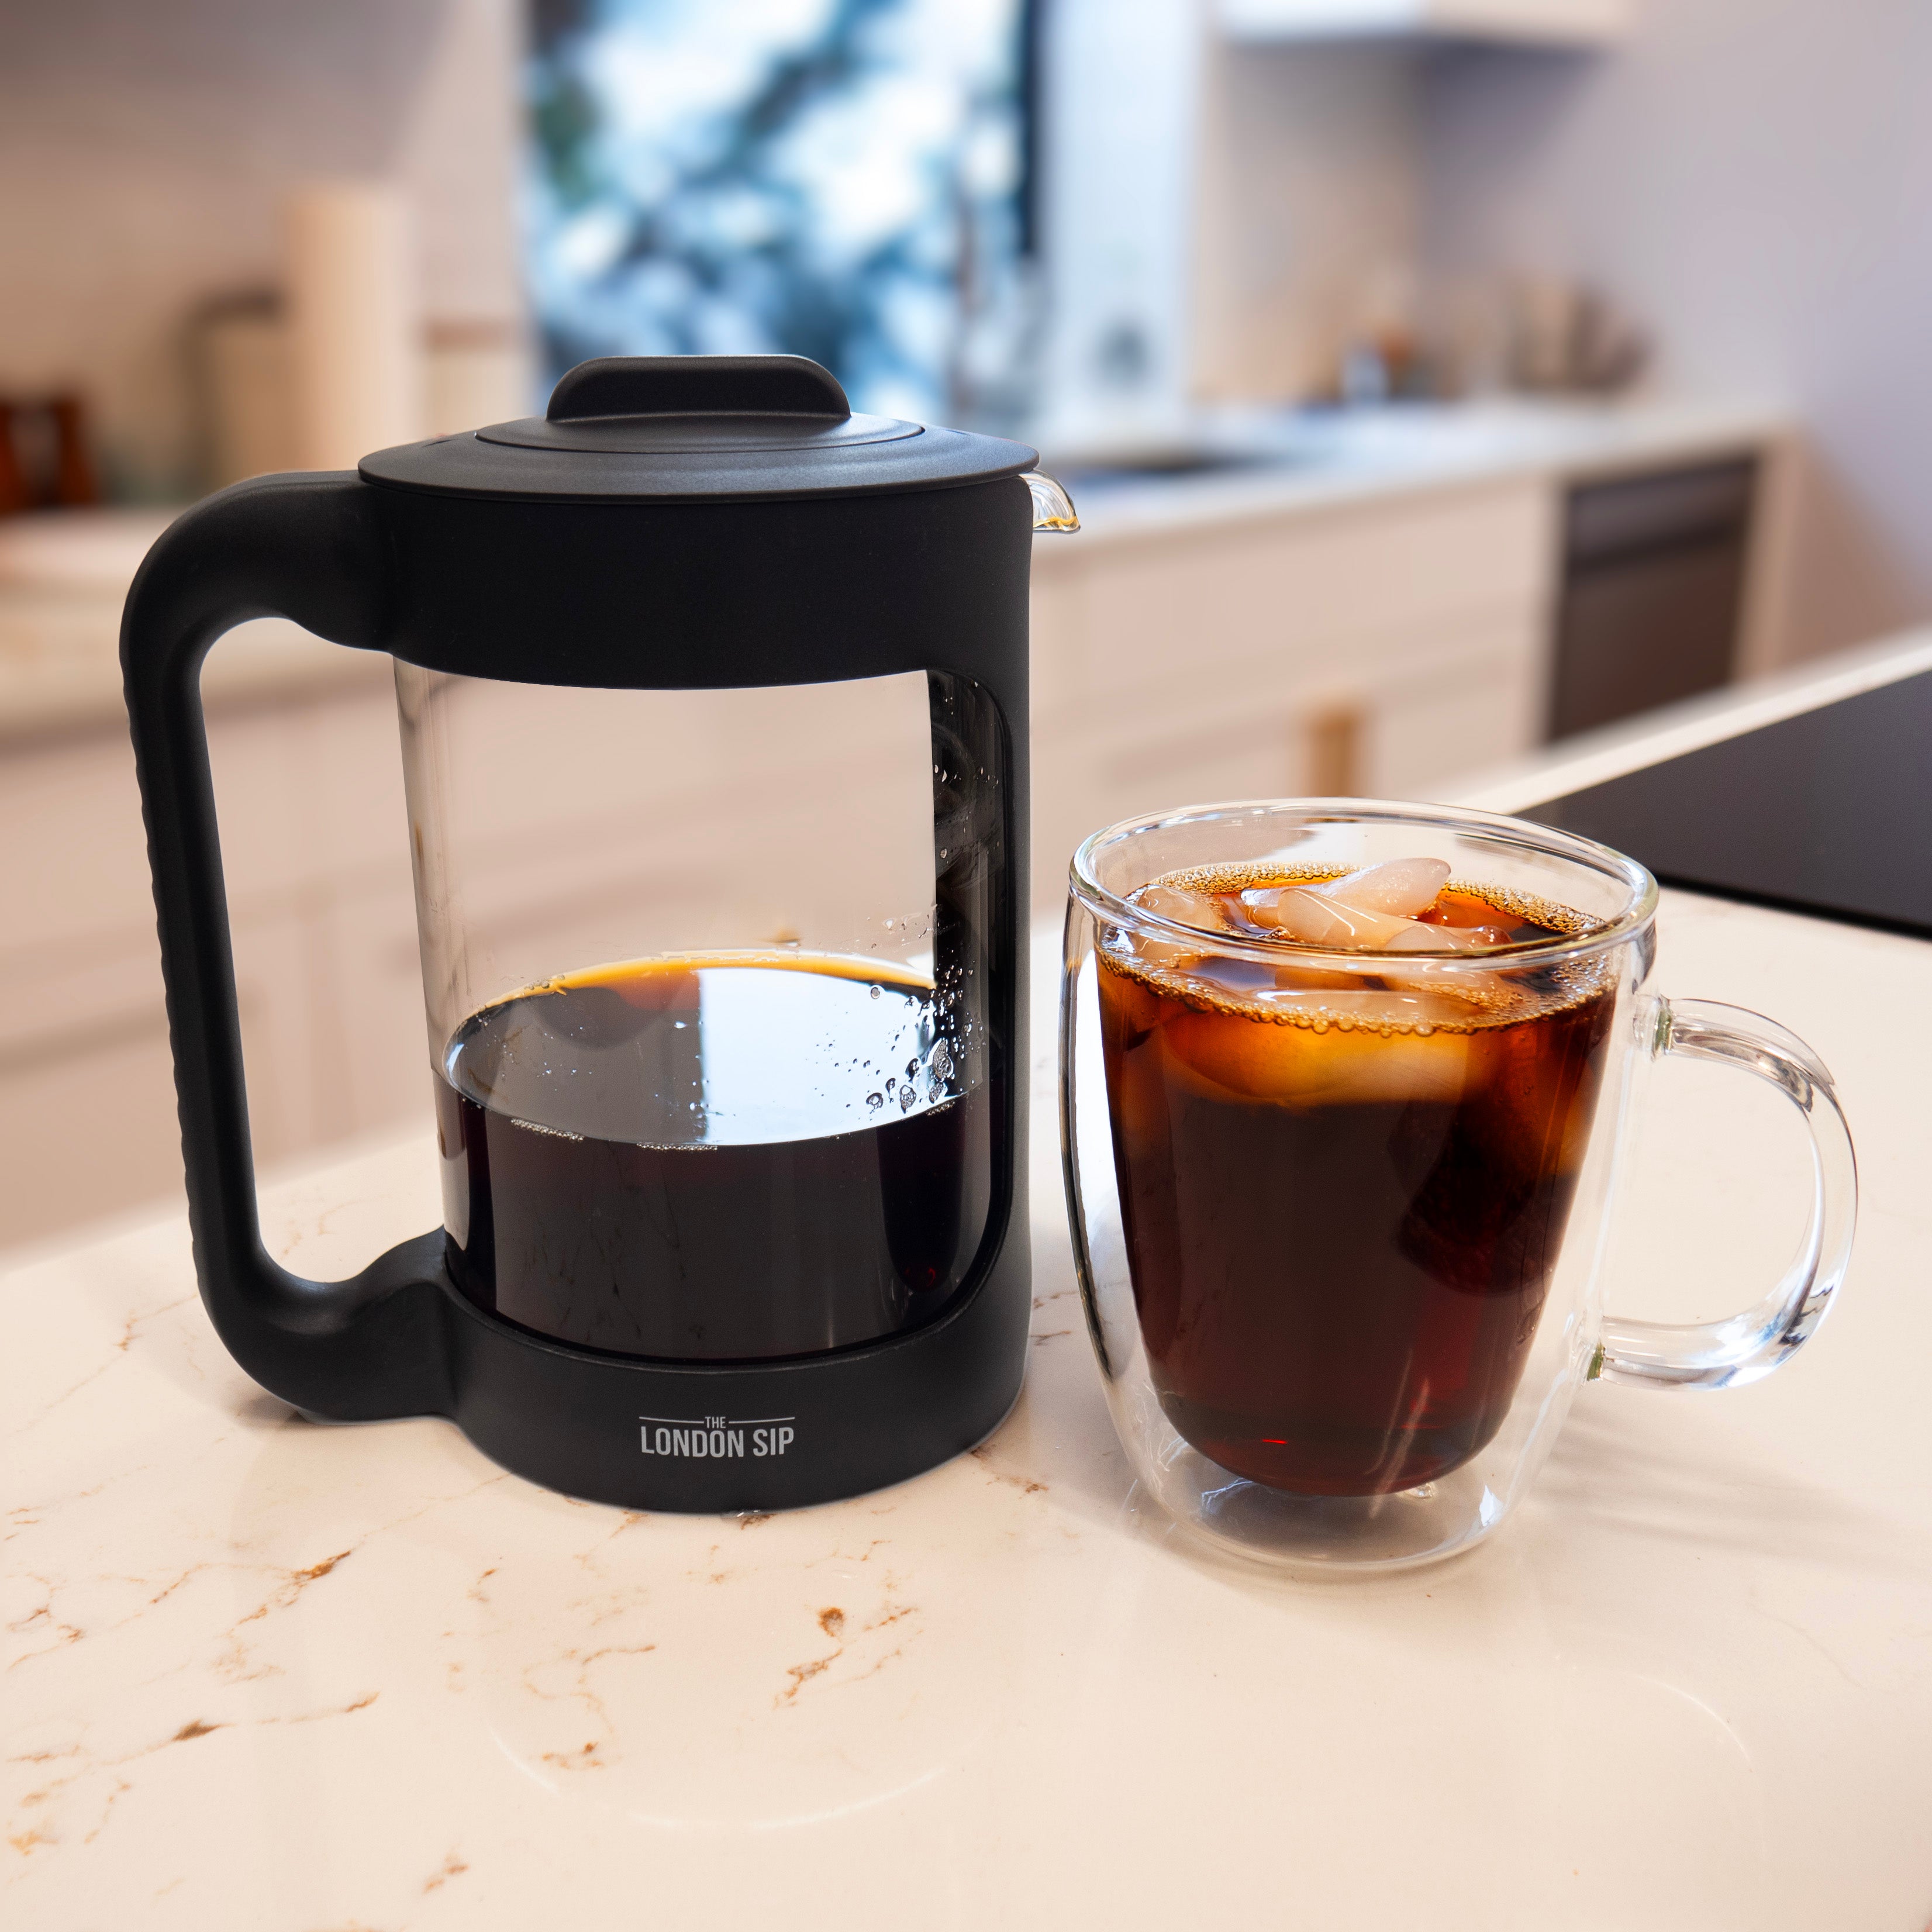 The London Sip French Press Immersion Brewer Coffee Maker with